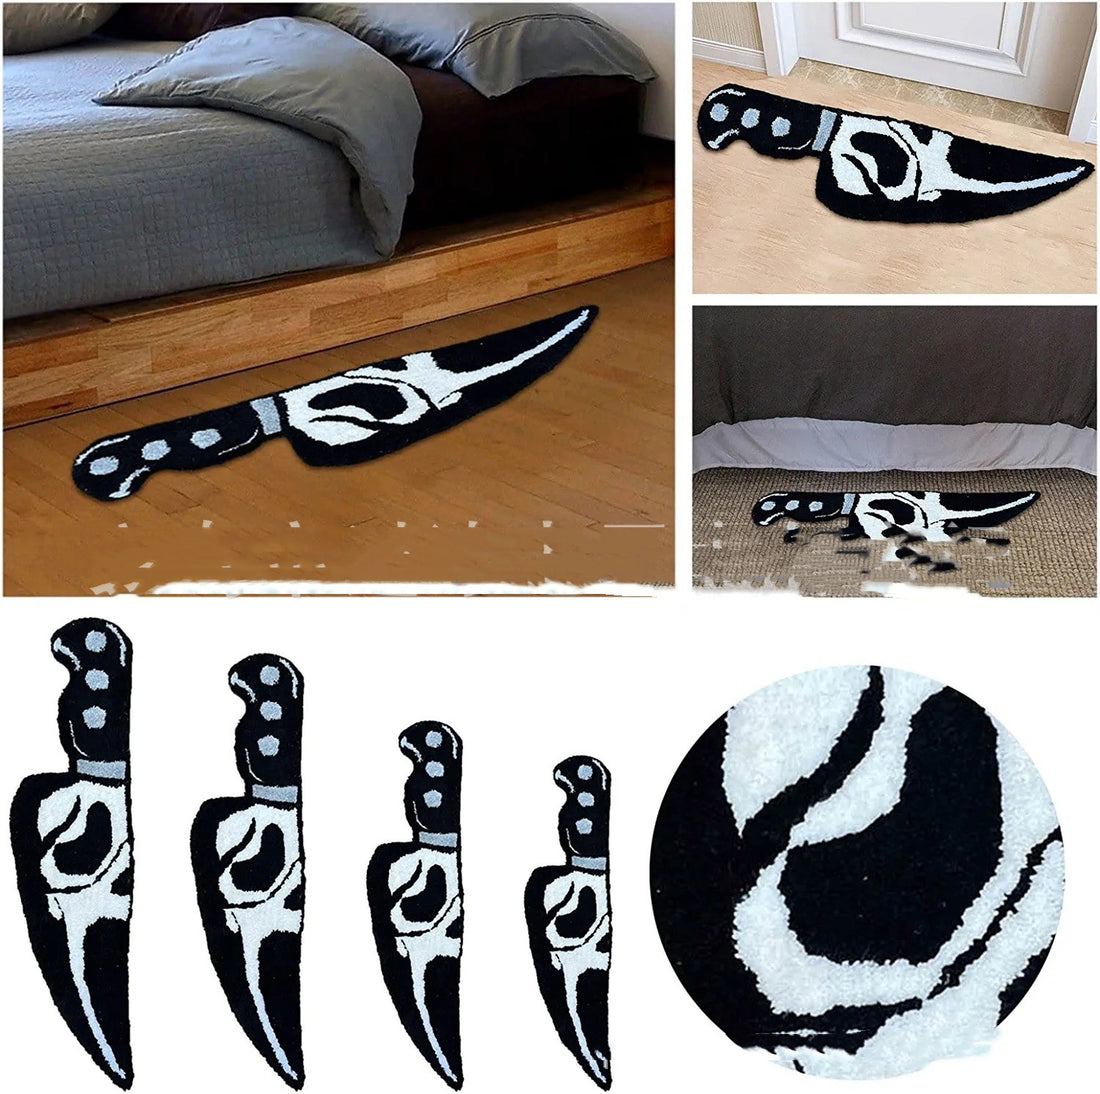 Knife-shaped Horrible Character Carpet Curated Room Kits